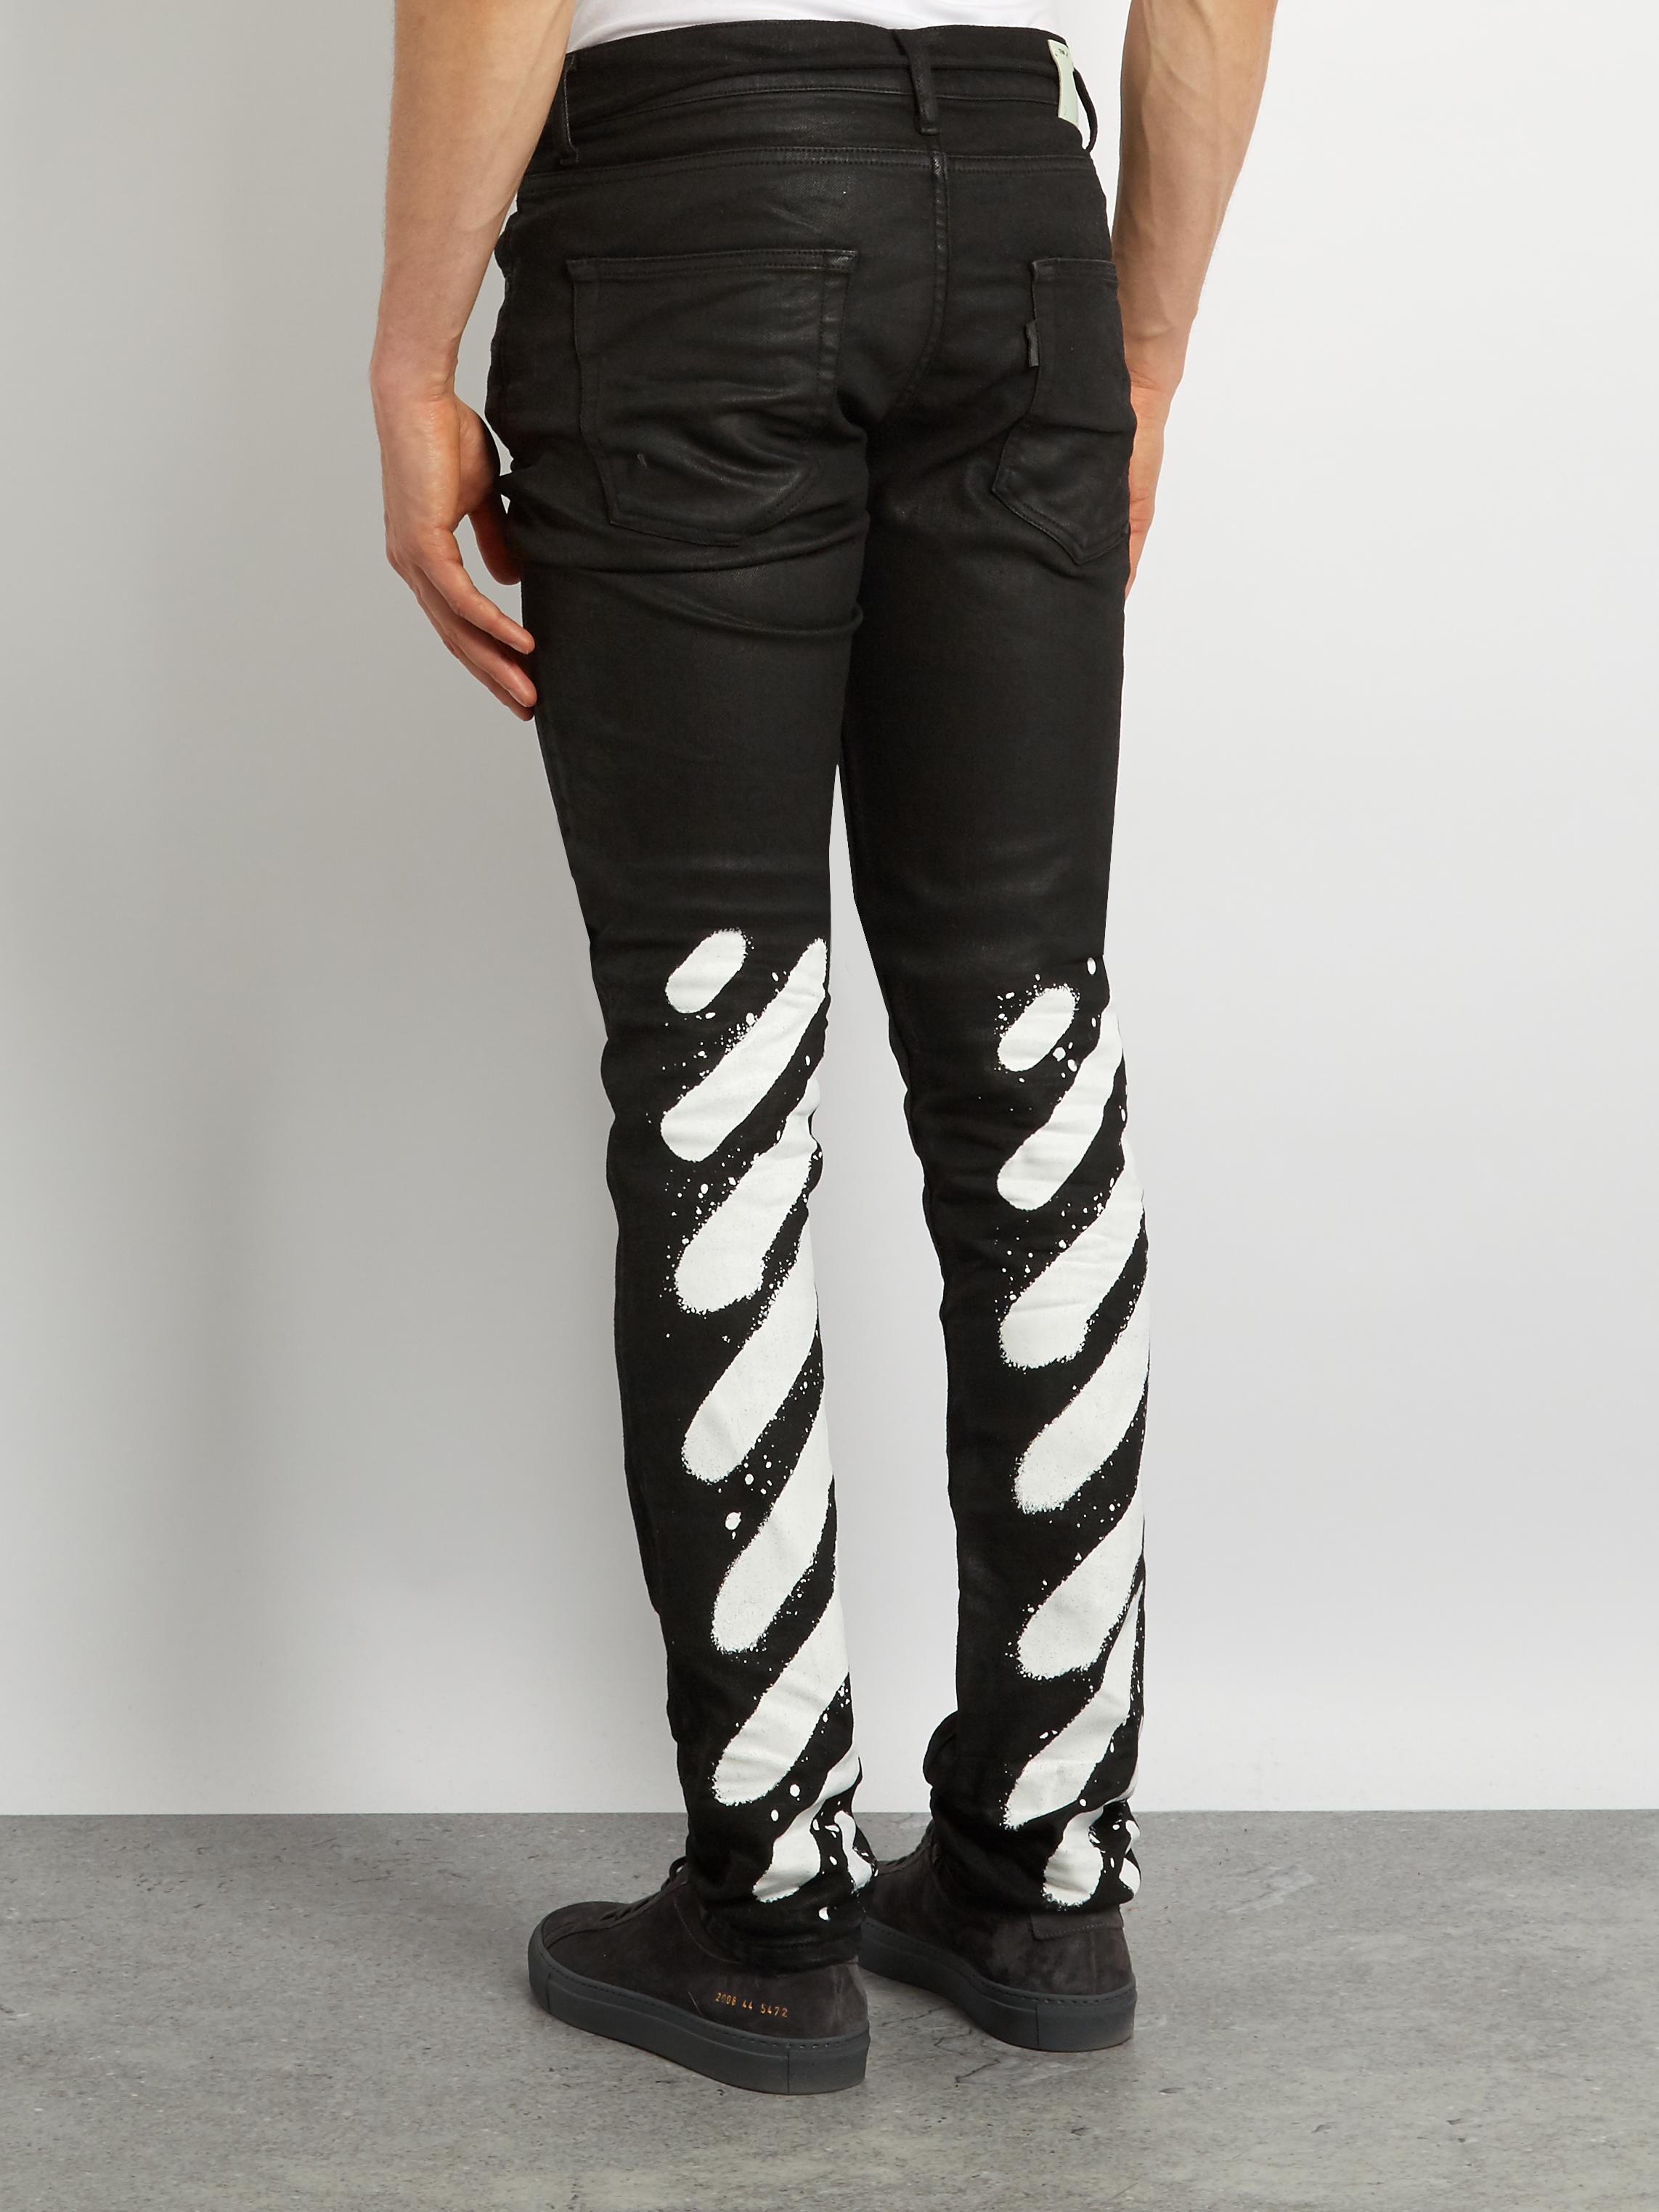 Off-White c/o Virgil Abloh Spray-paint Print Slim-fit Jeans in 